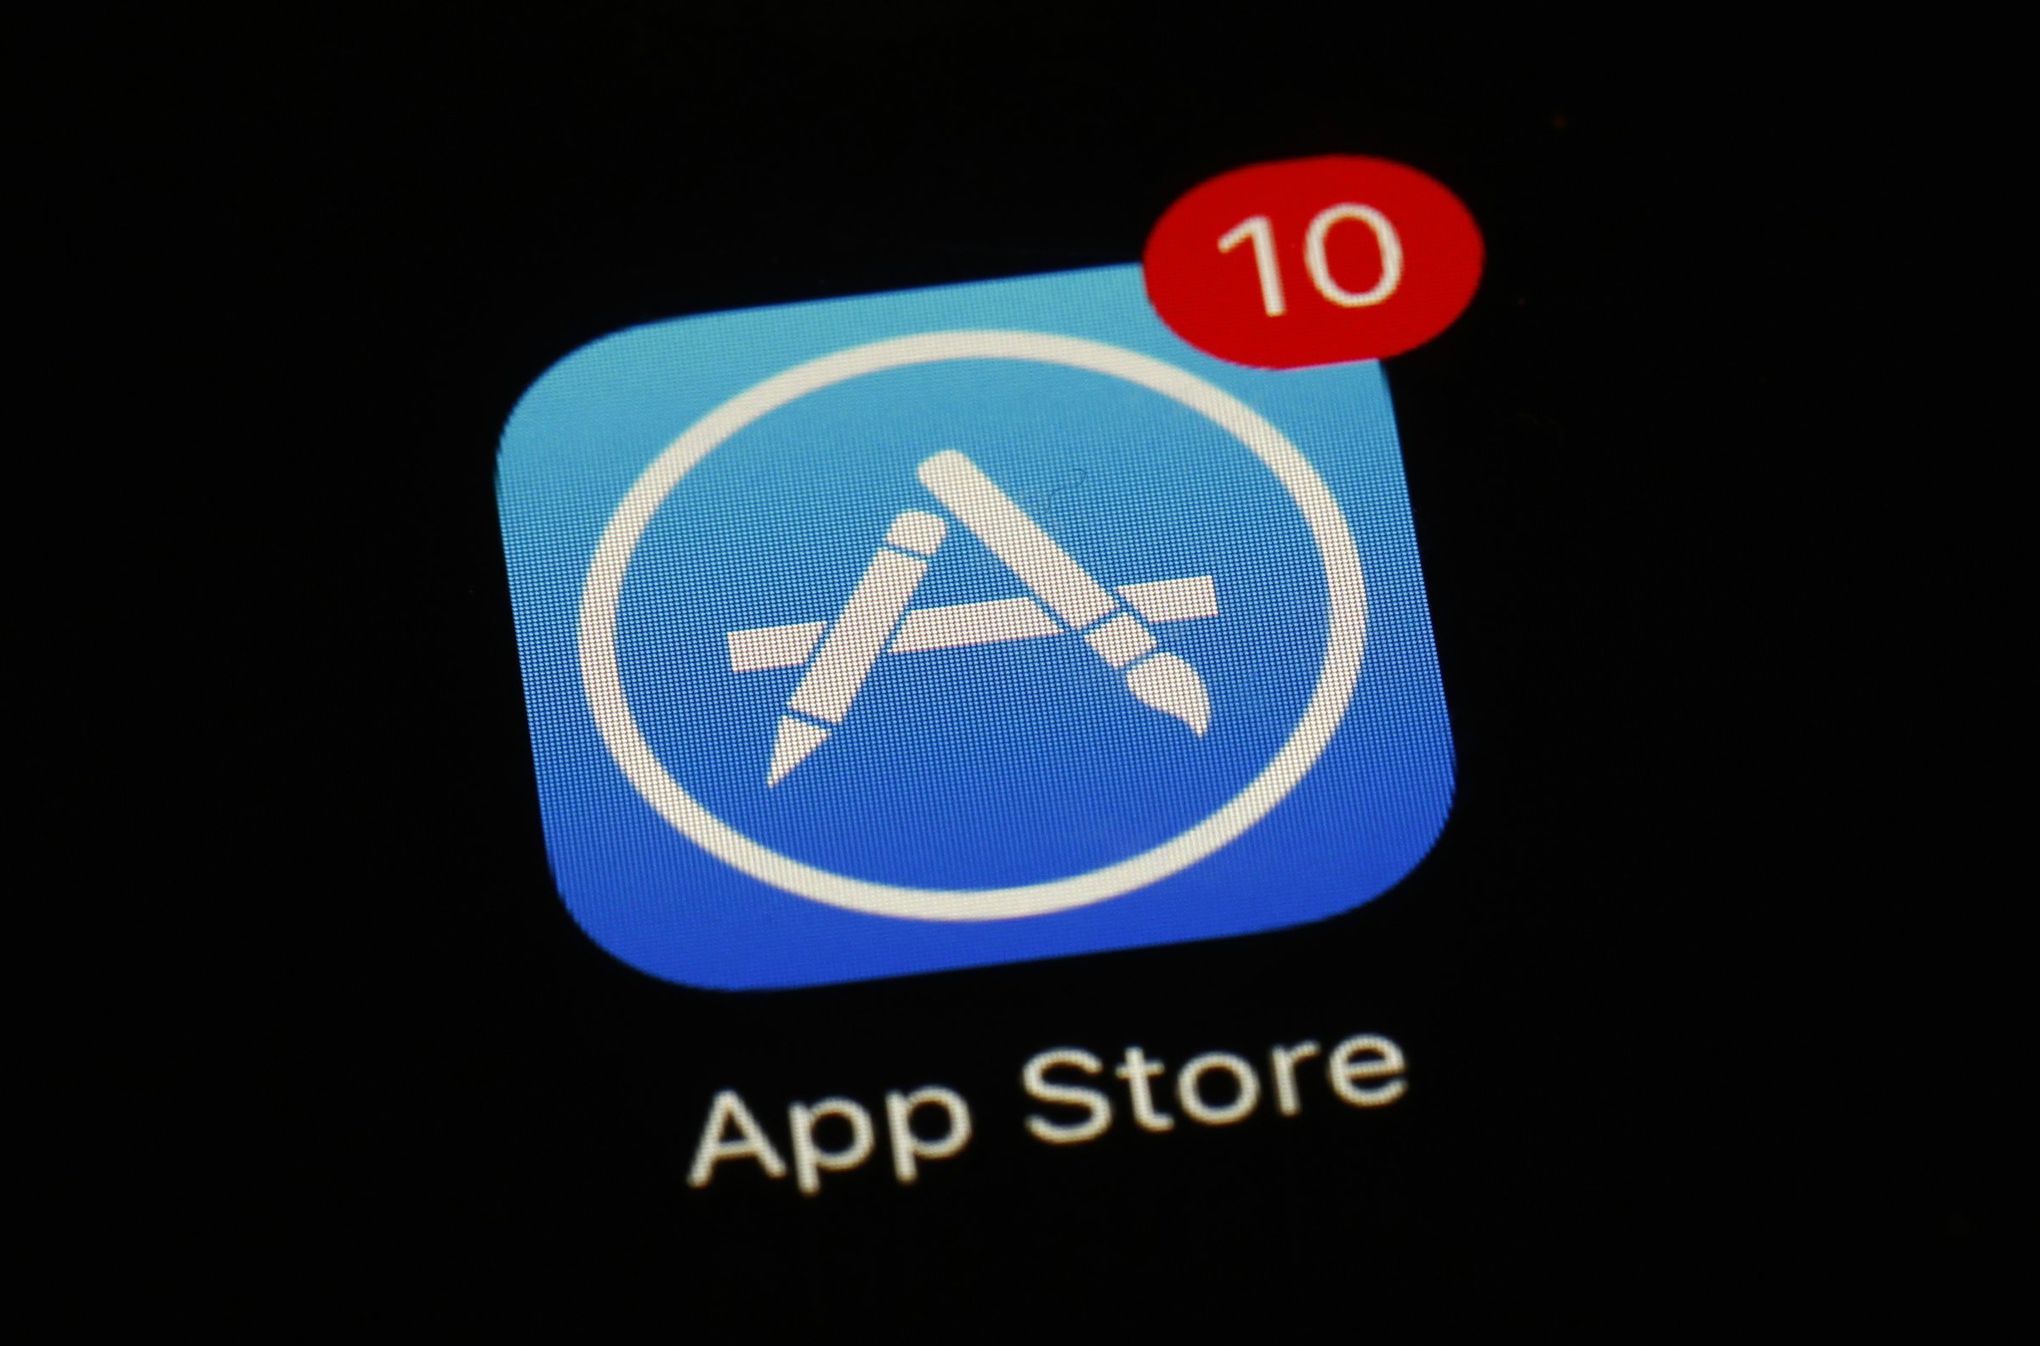 He believed Apple's App Store was safe. Then a fake app stole his